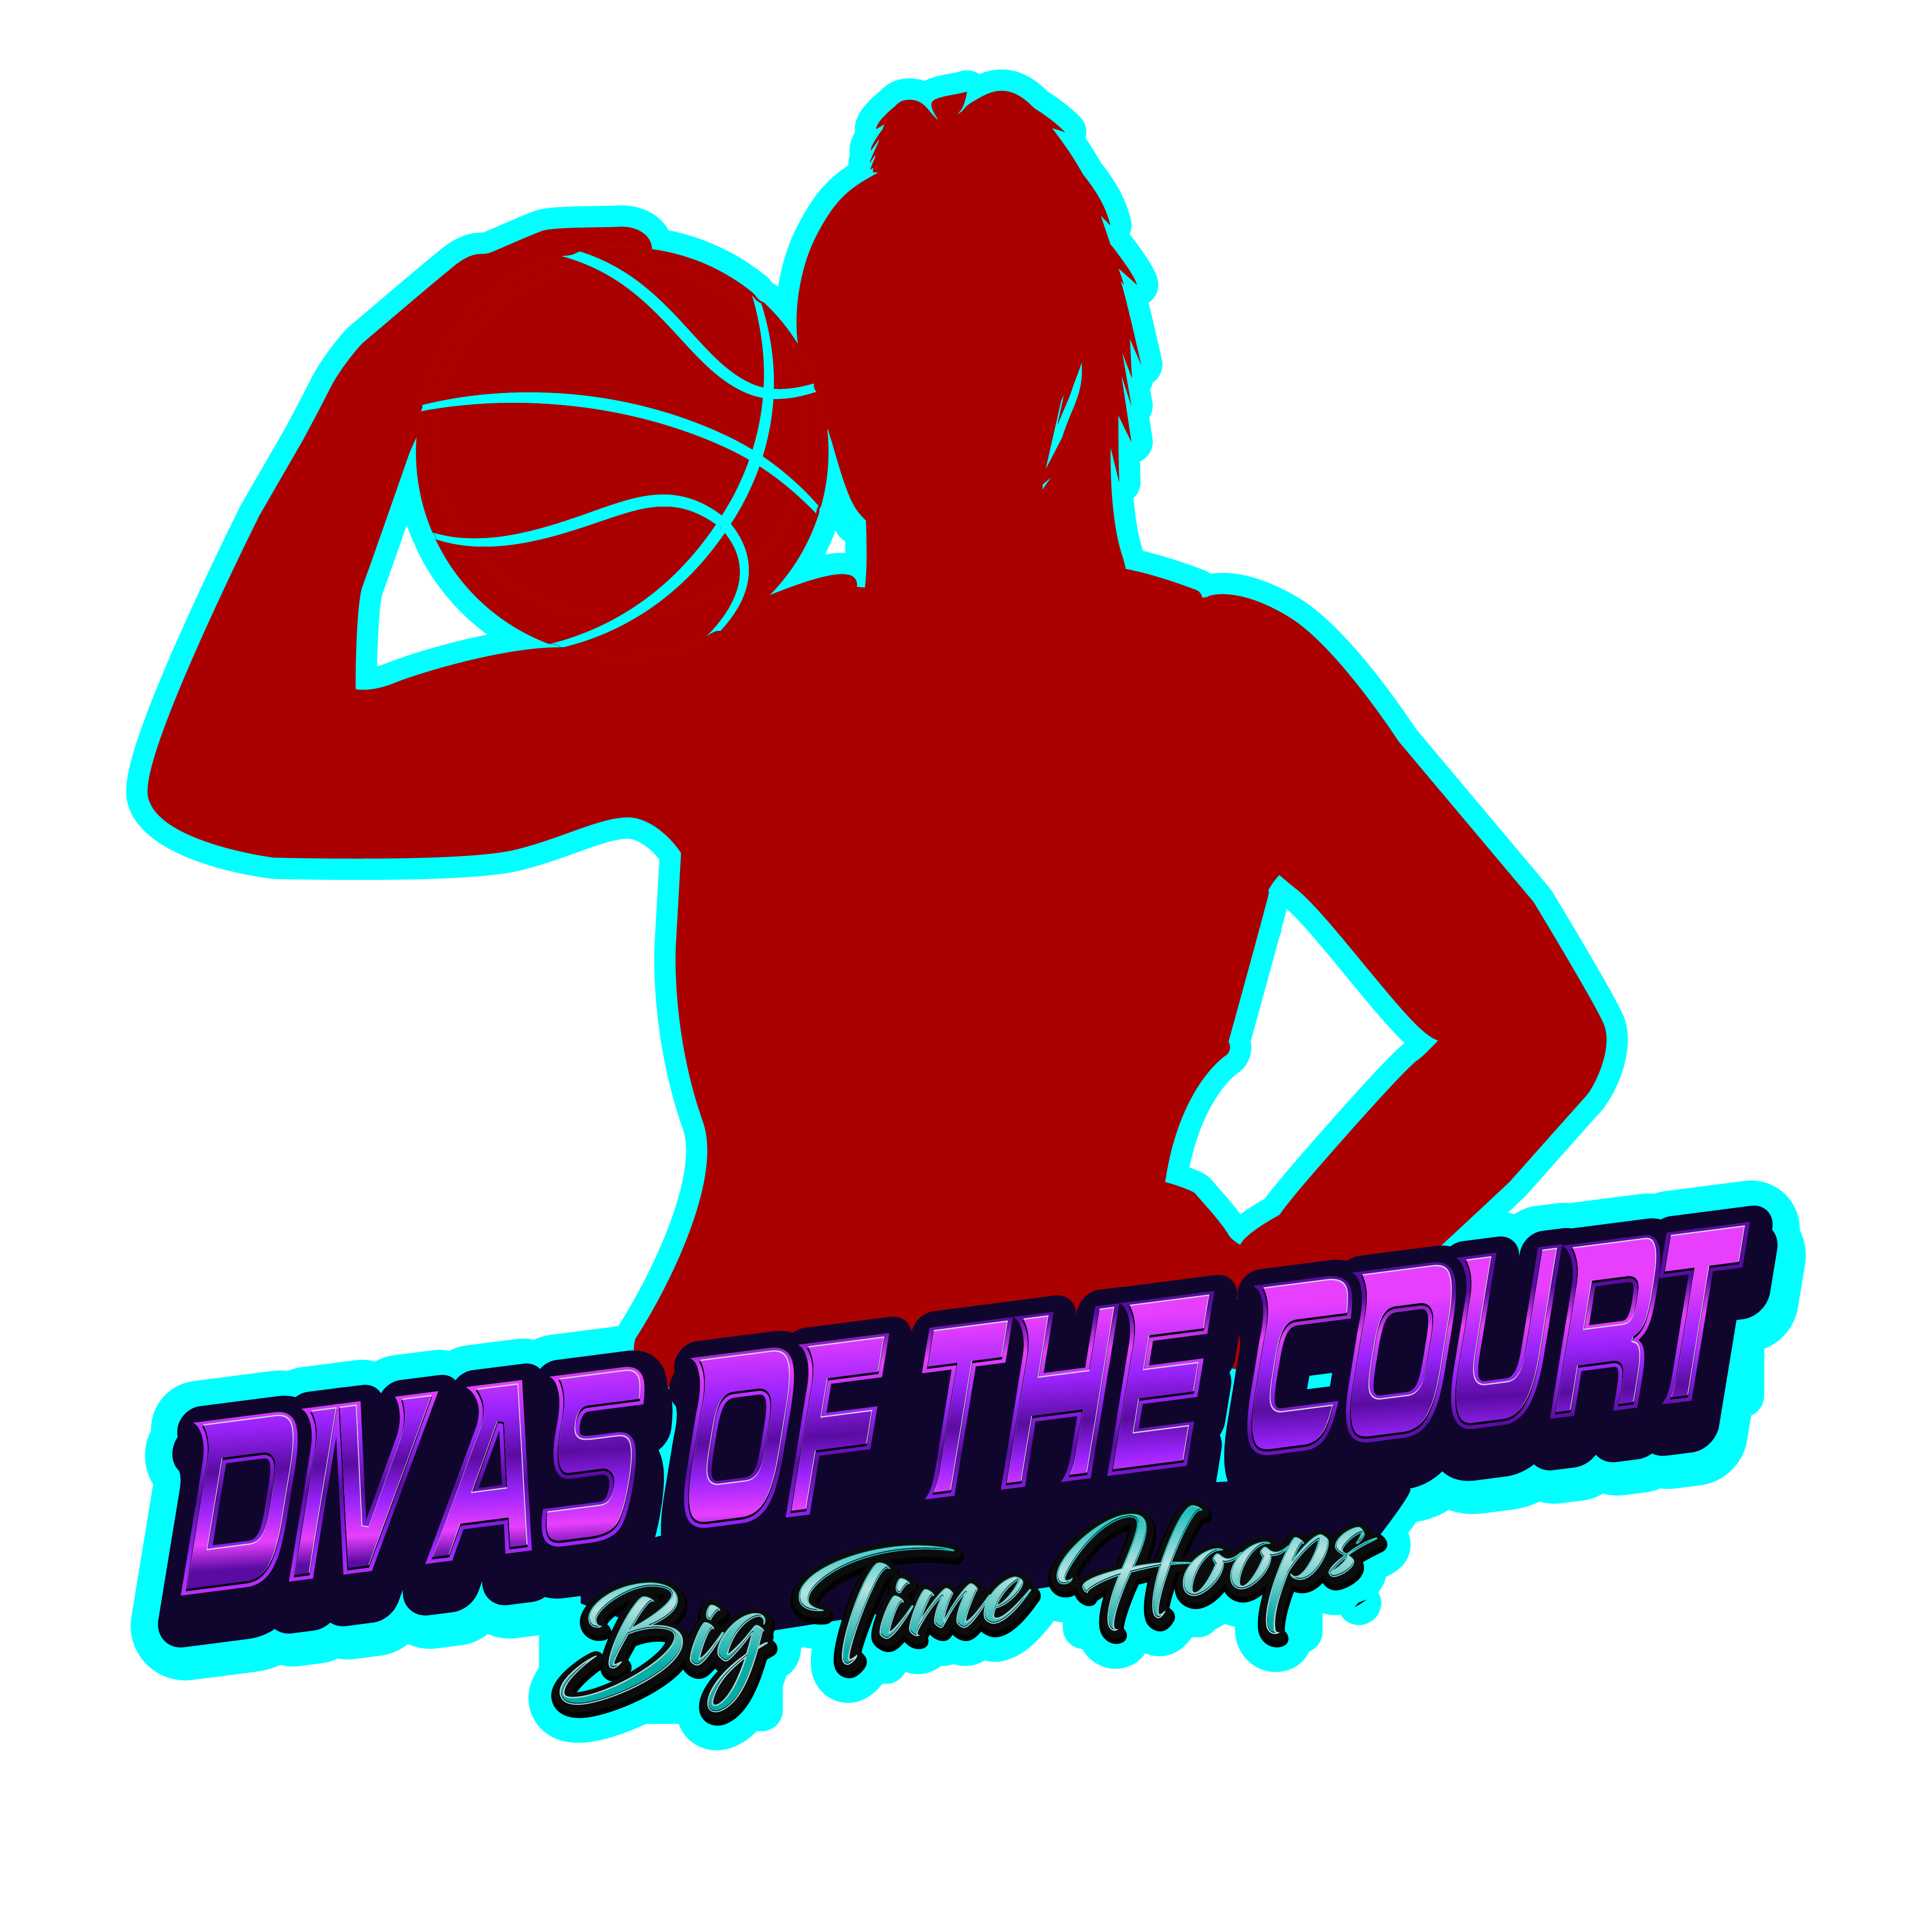 Divas of the Court presented by Big Time Hoops | United Sportsplex